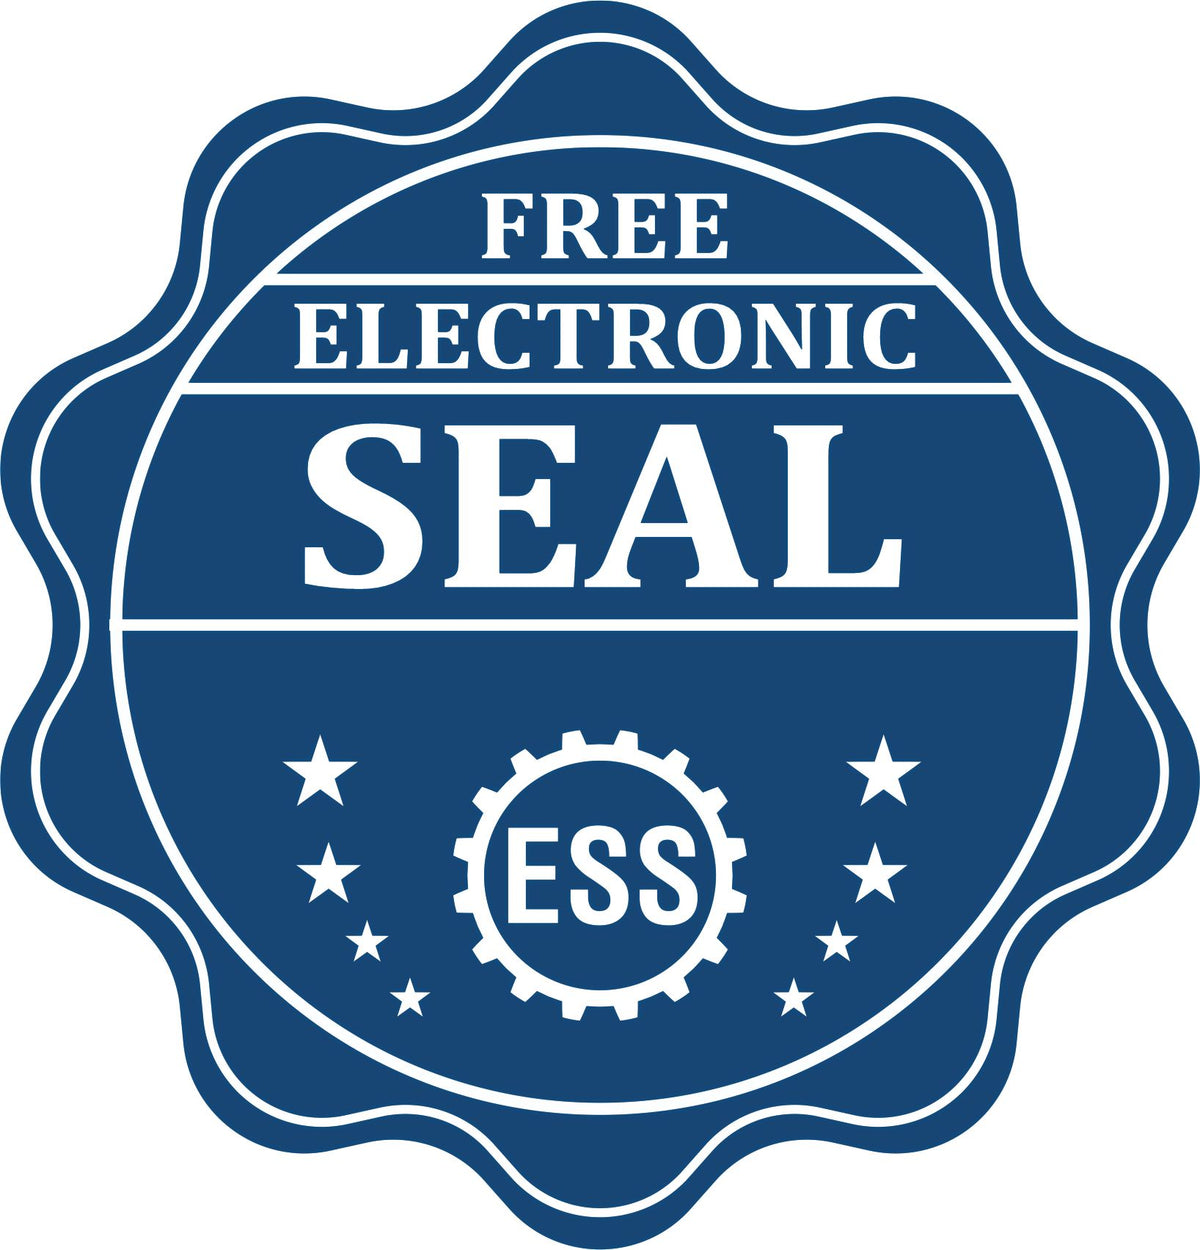 A badge showing a free electronic seal for the Gift Iowa Geologist Seal with stars and the ESS gear on the emblem.